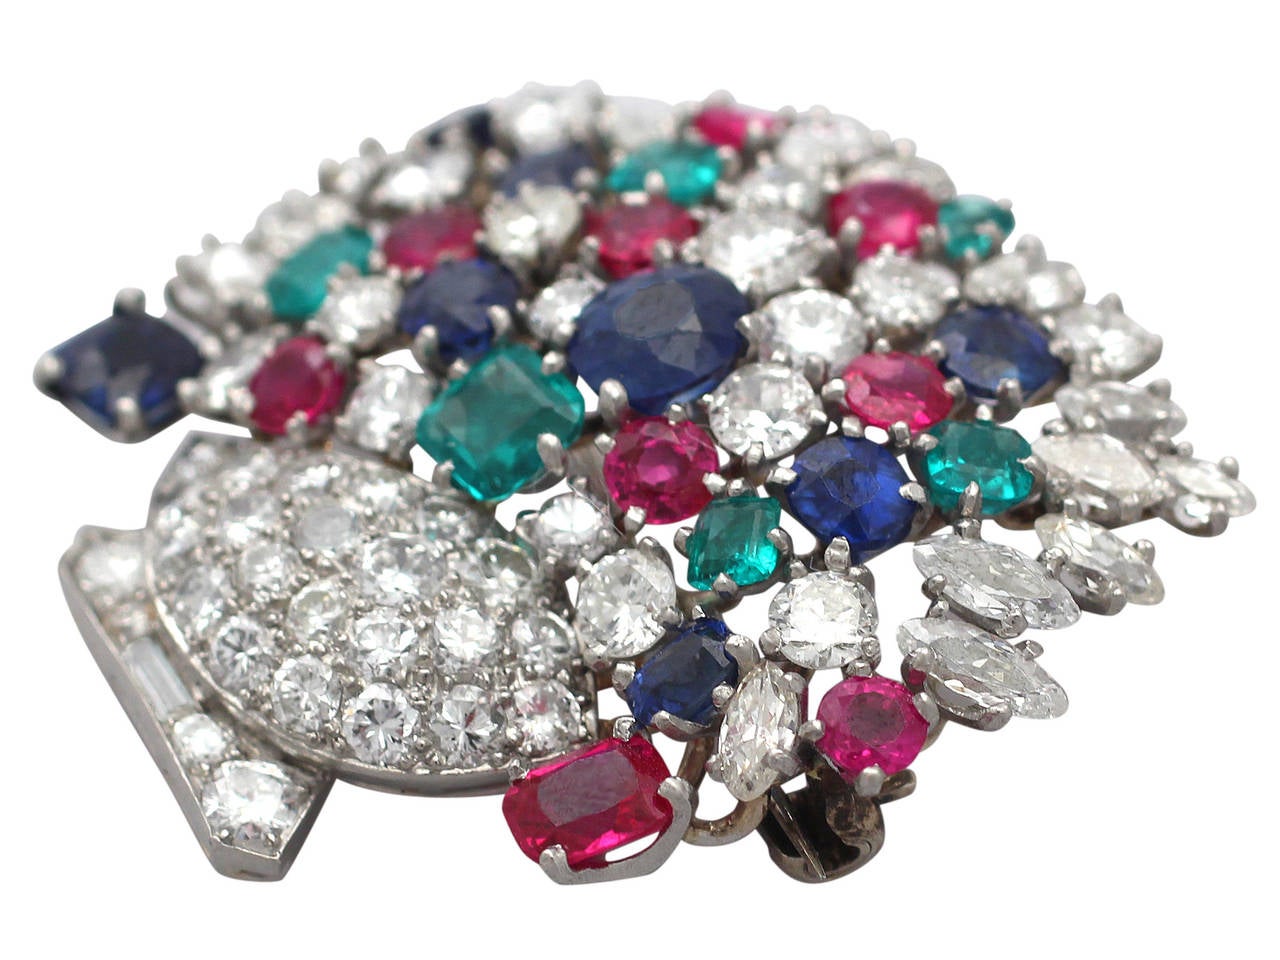 A stunning, fine and impressive 4.61 carat diamond and a total of 4.68 carat natural ruby, sapphire and emerald, giardinetti/tutti frutti style, platinum brooch; part of our vintage jewelry and estate jewelry collections

This impressive vintage